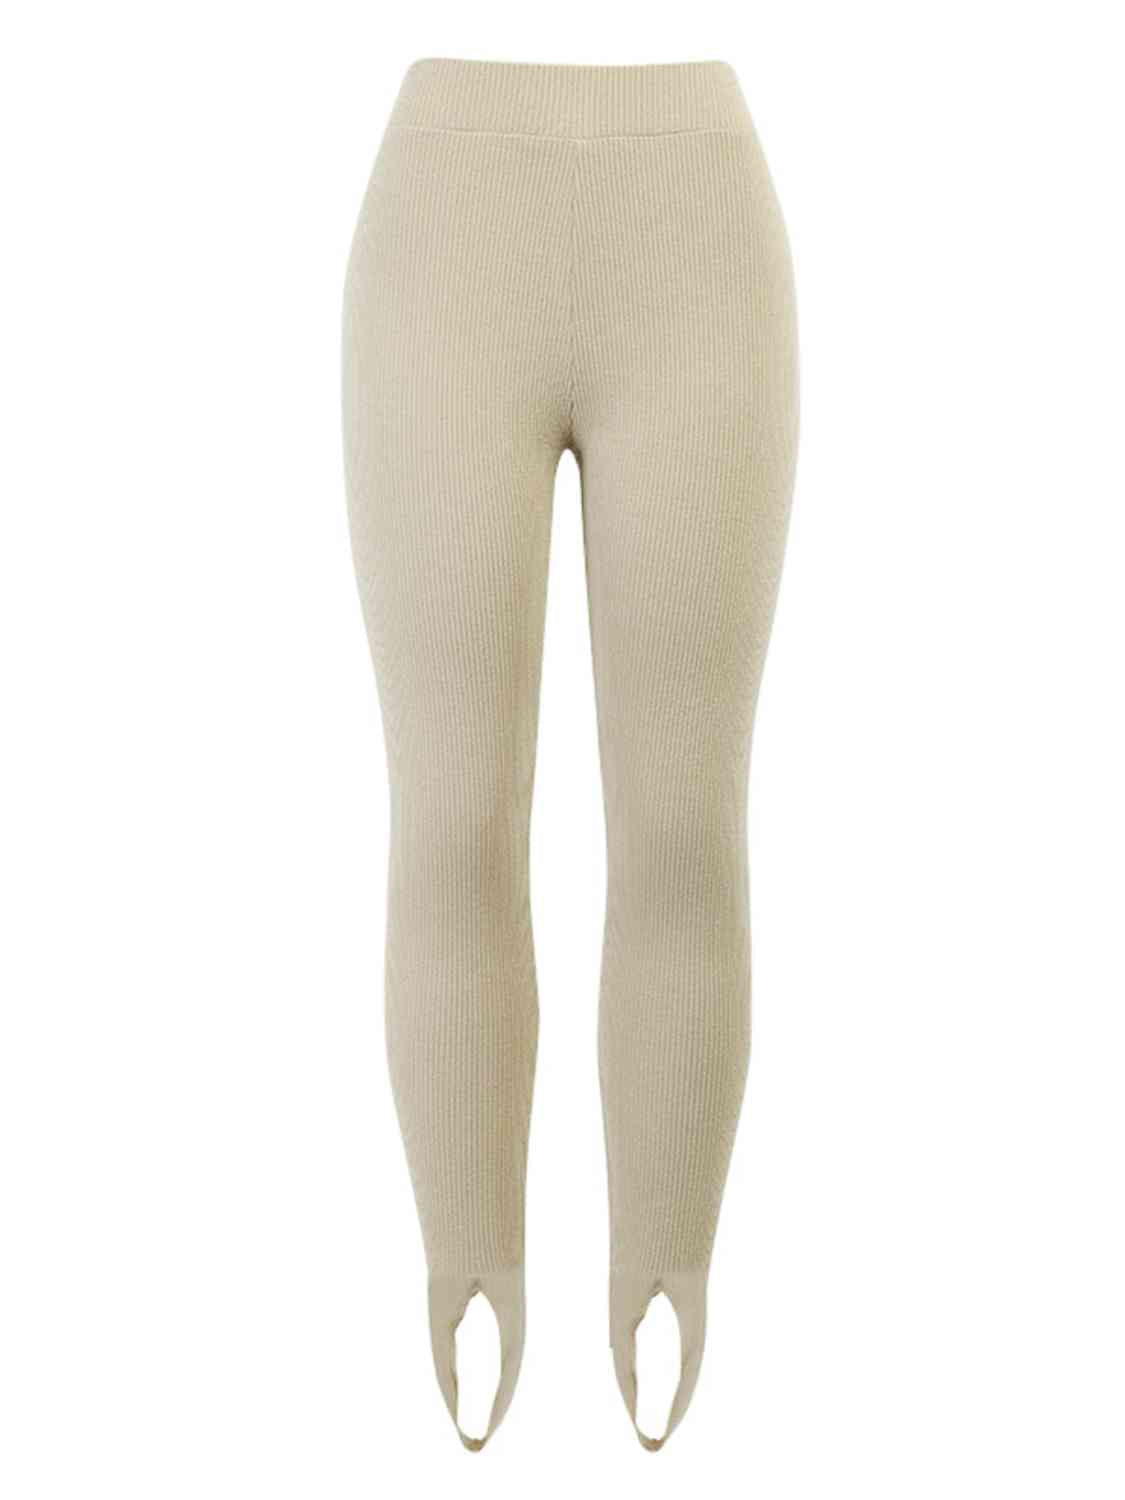 Ribbed Mid Waist Leggings Print on any thing USA/STOD clothes